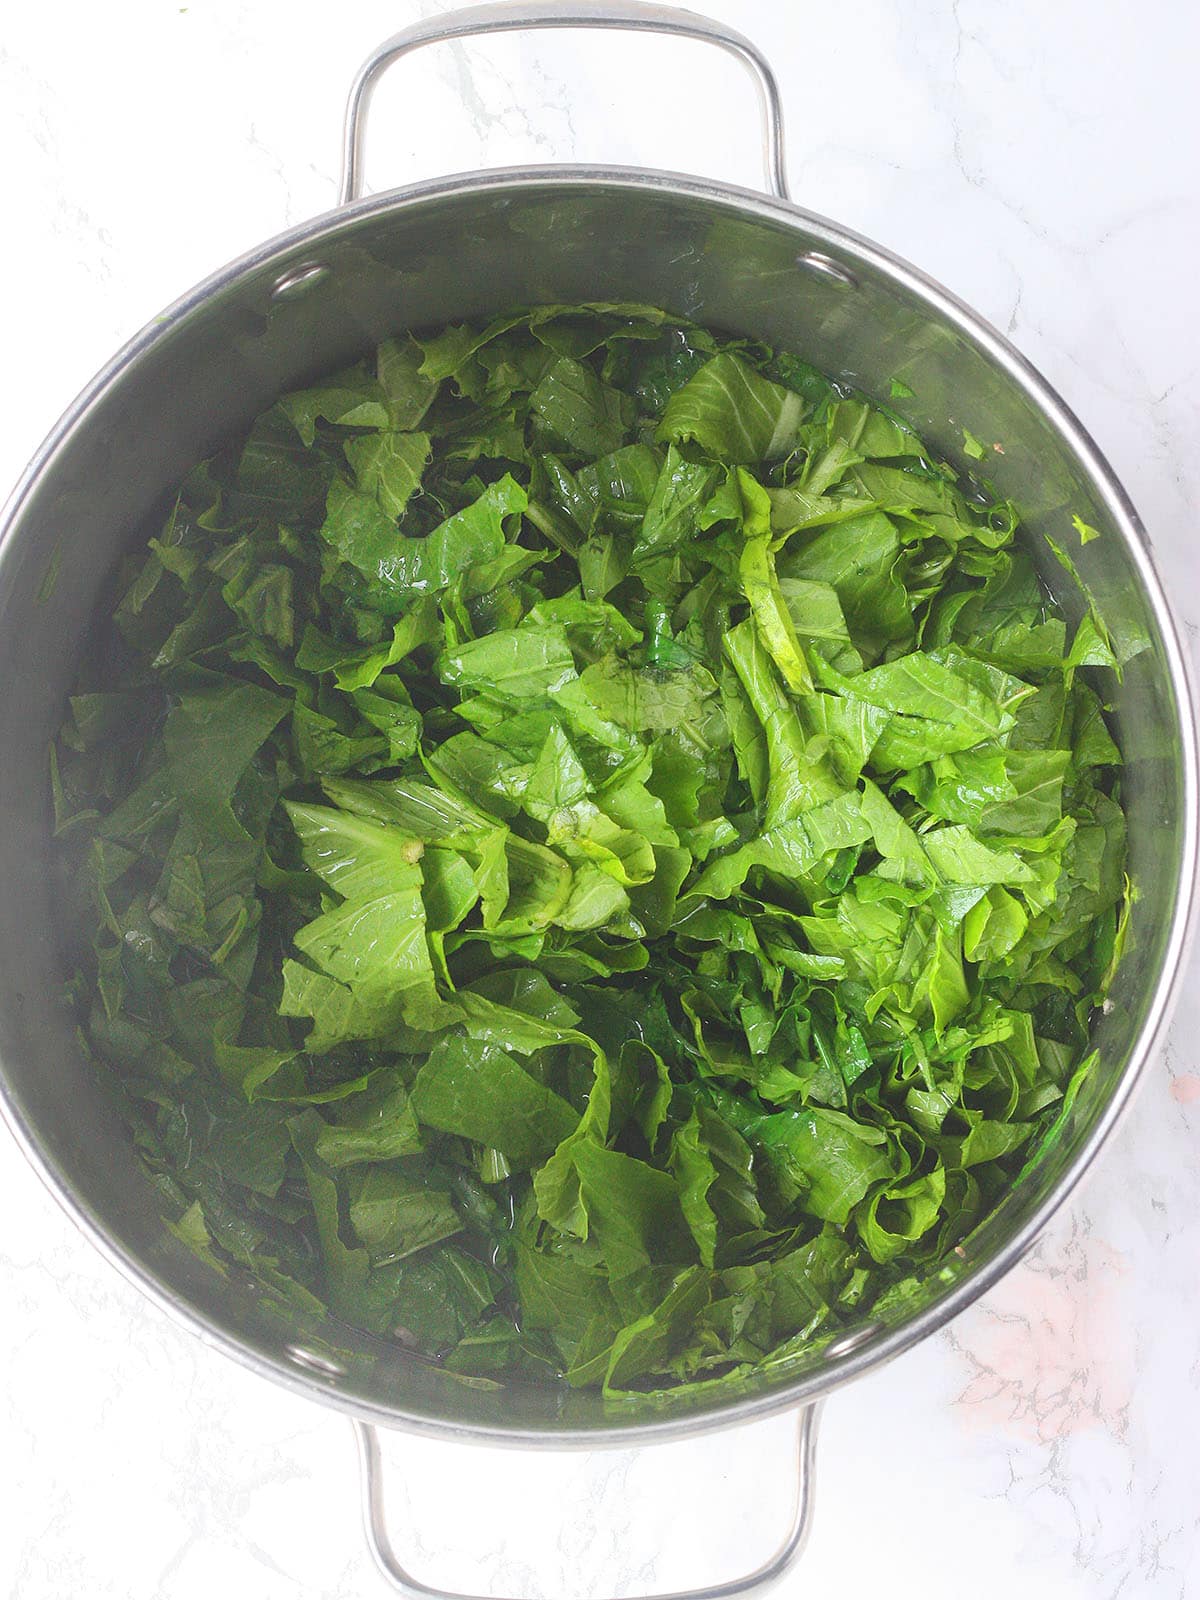 uncooked chopped turnip greens in a stainless steel pot